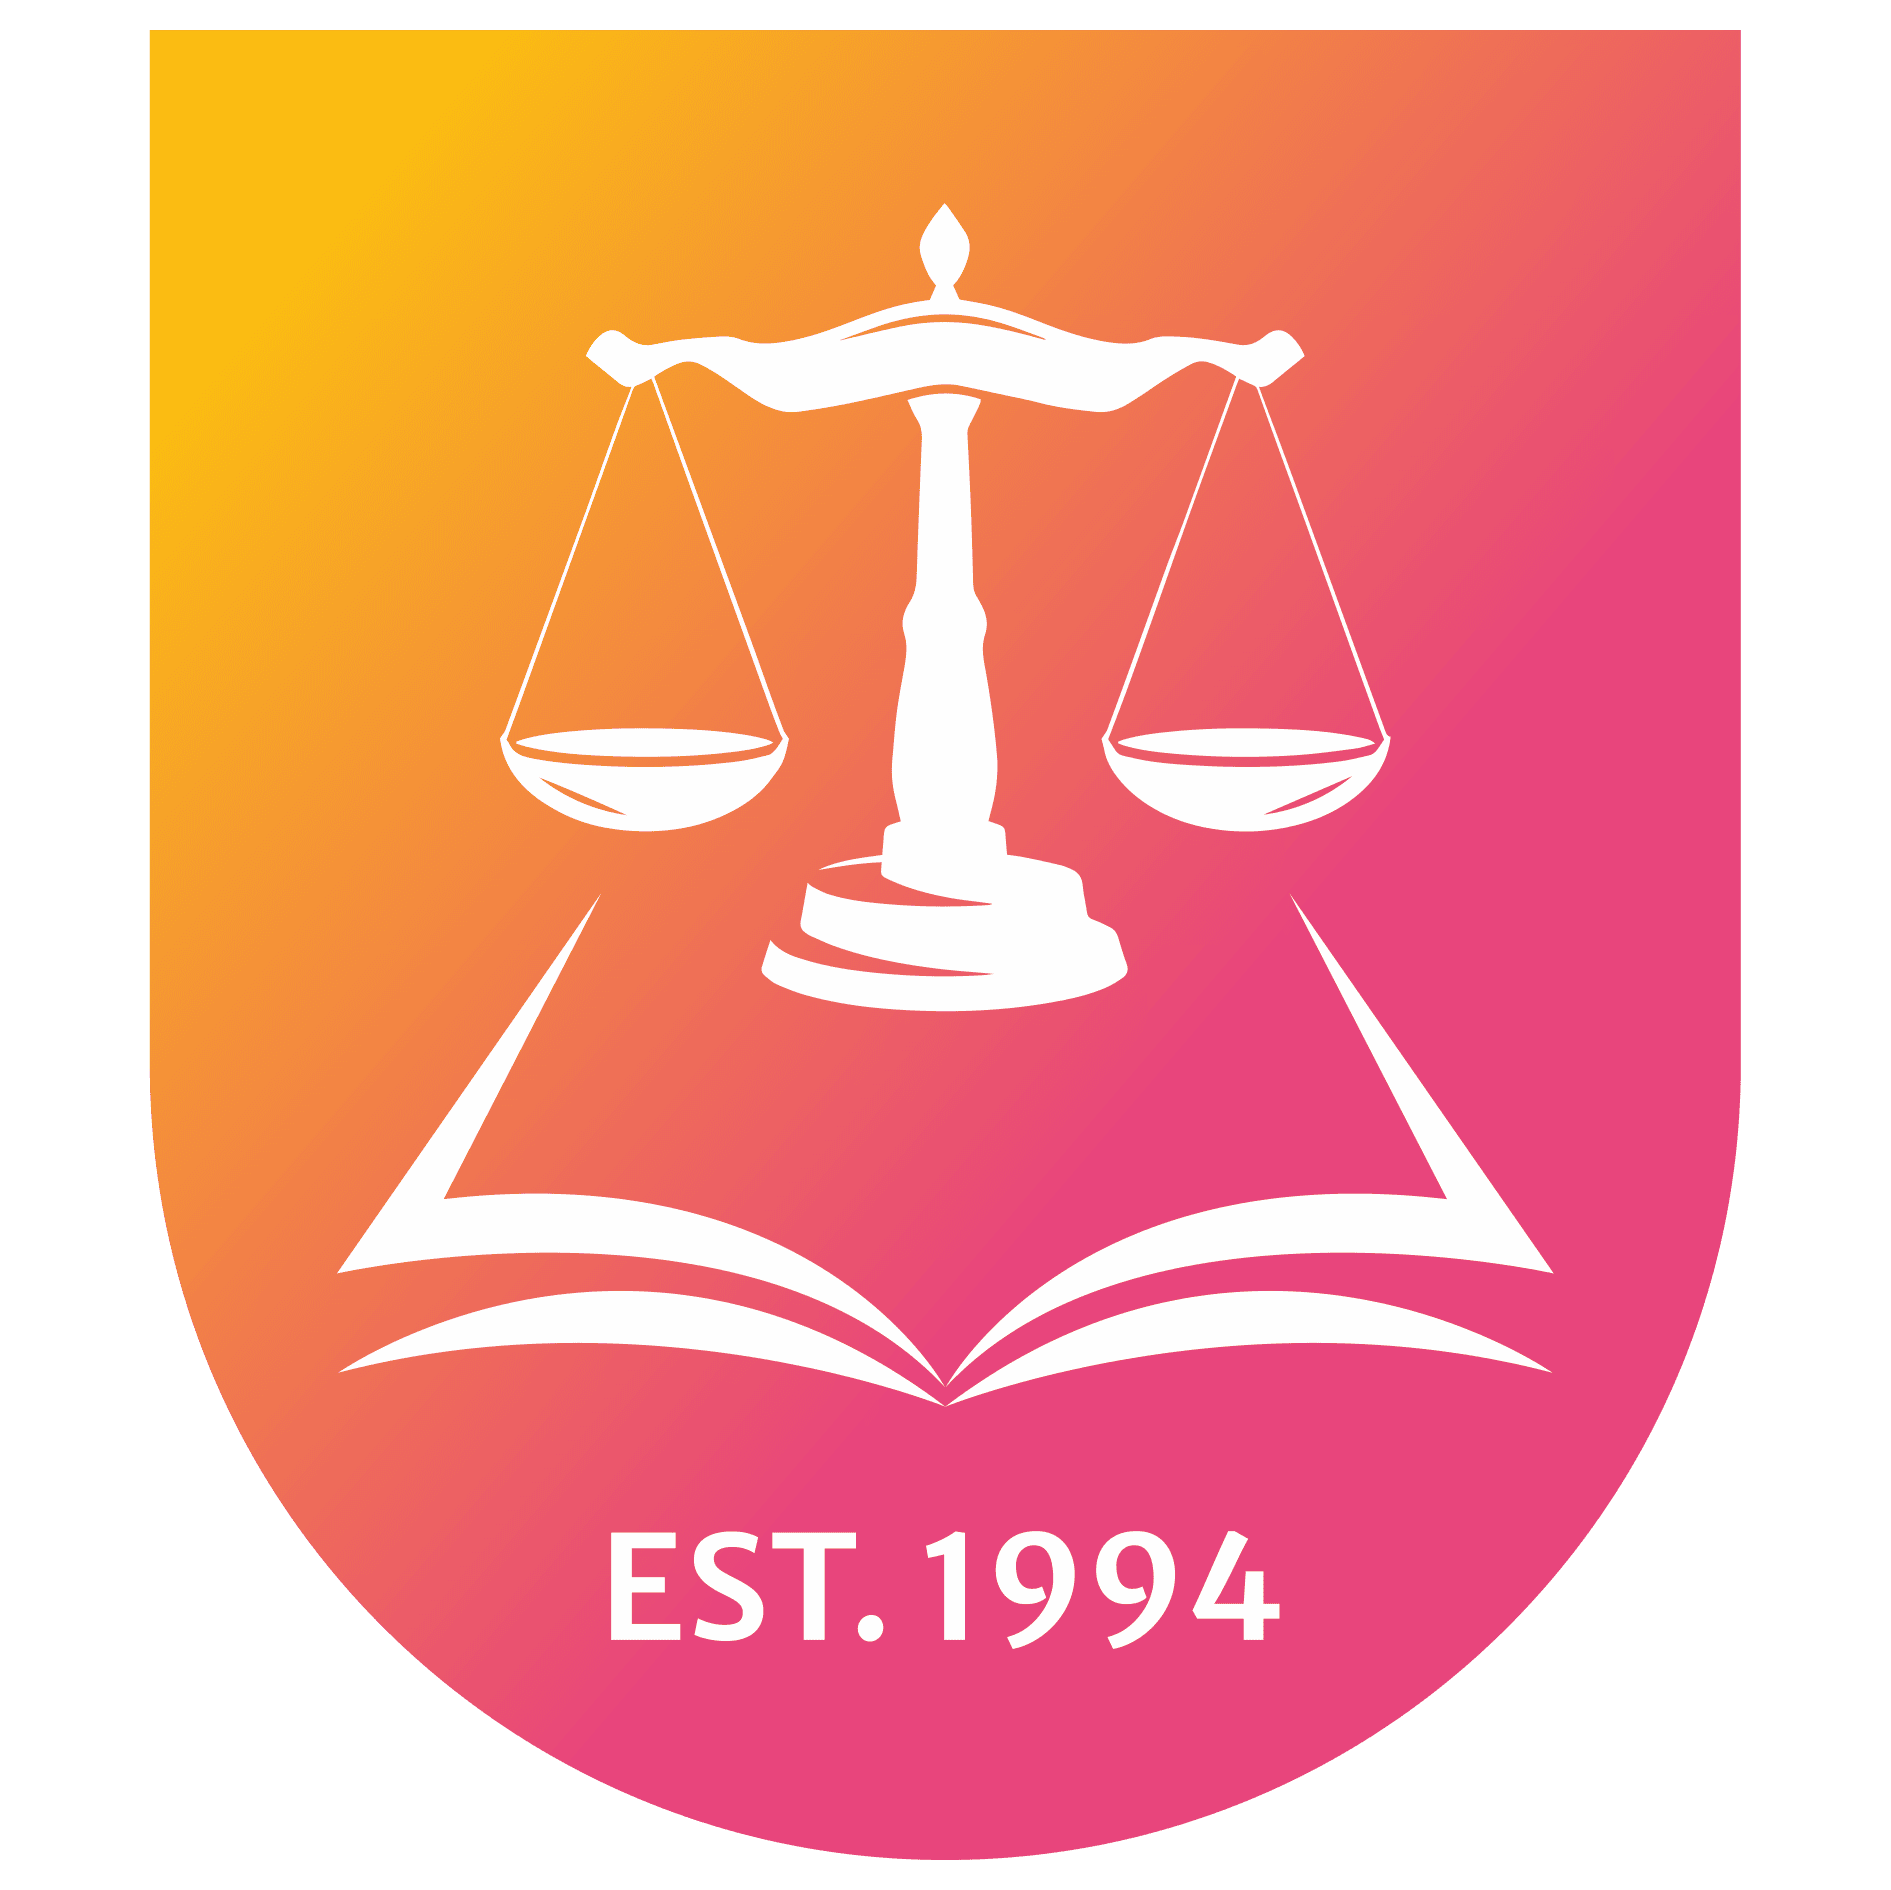 Ramkrishna Law Firm and Reasearch Centre Logo